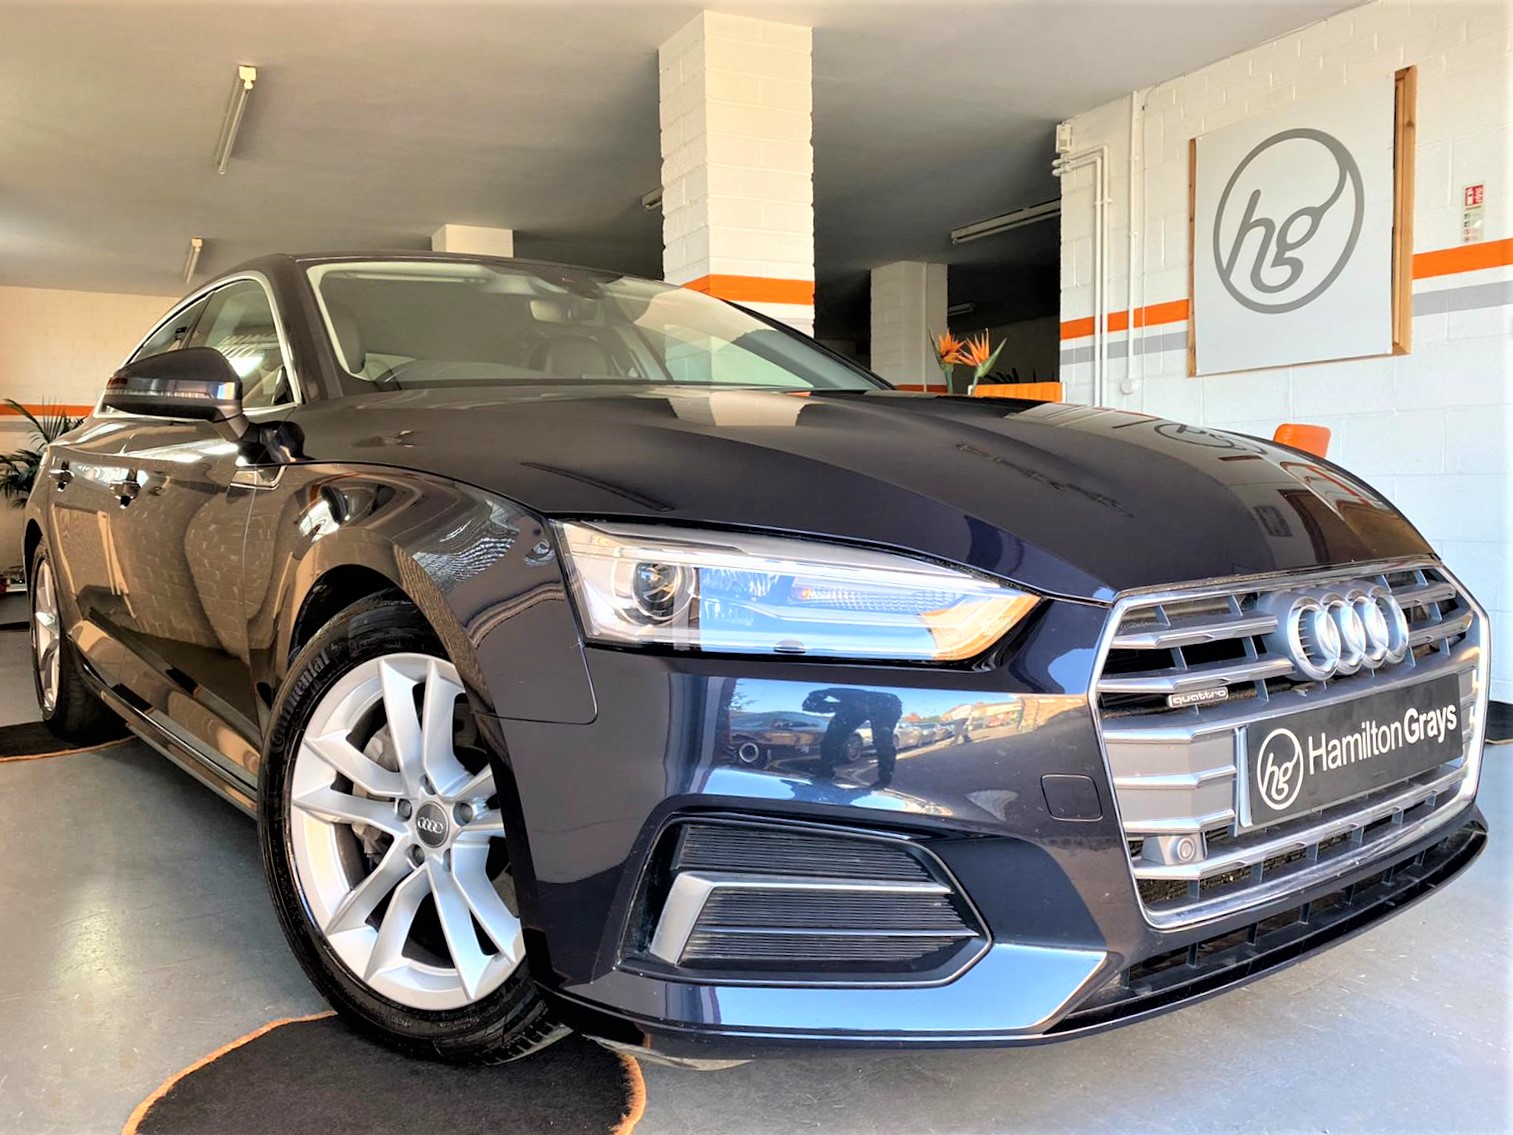 2017 (17) Audi A5 Sportback Sport 2.0 TDI quattro 190 PS Stronic. In Midnight Blue with Full Black Leather Upholstery. 38k. With FASH.. £19,950